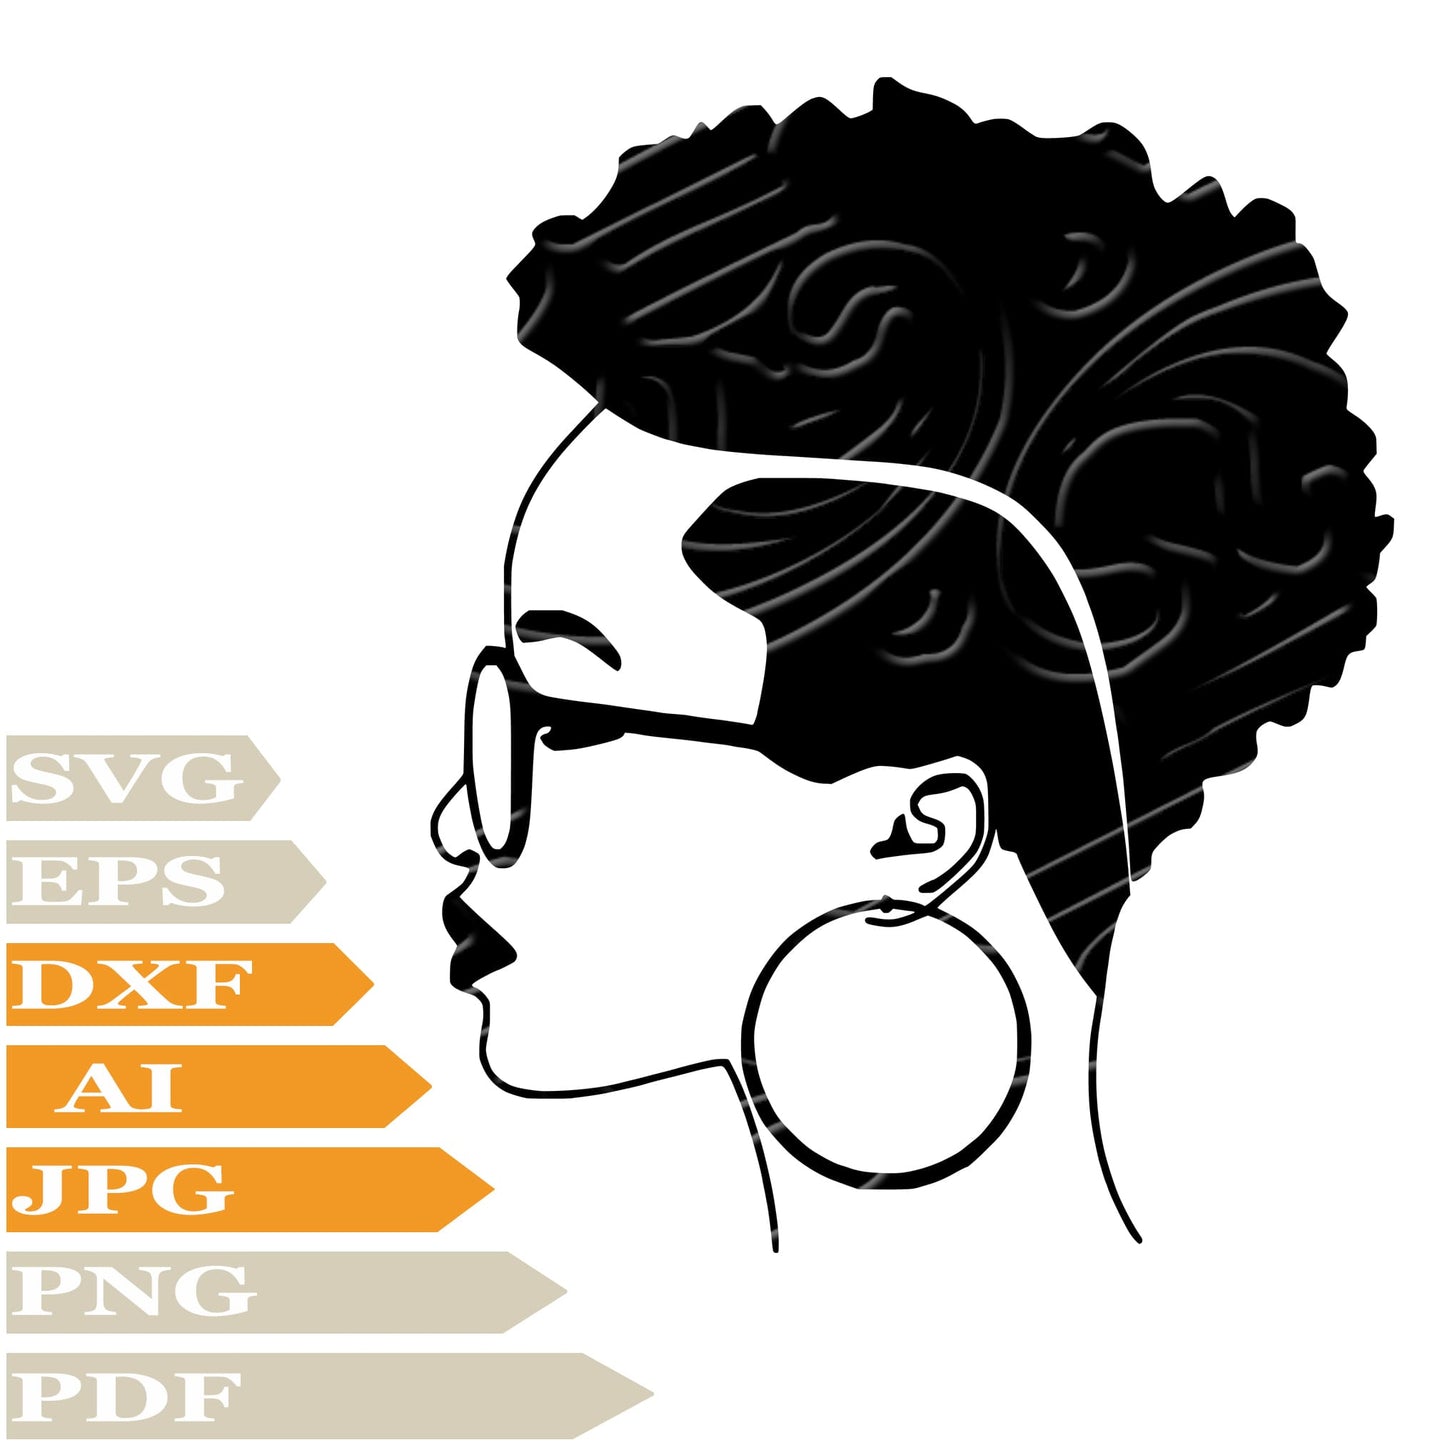 Afro American Girl SVG-Girl Personalized SVG-Girl Glasses Drawing SVG-Afro American Girl Vector Graphics-PNG-Decal-Cricut-Digital Files-Clip Art-Cut File-For Shirts-Silhouette